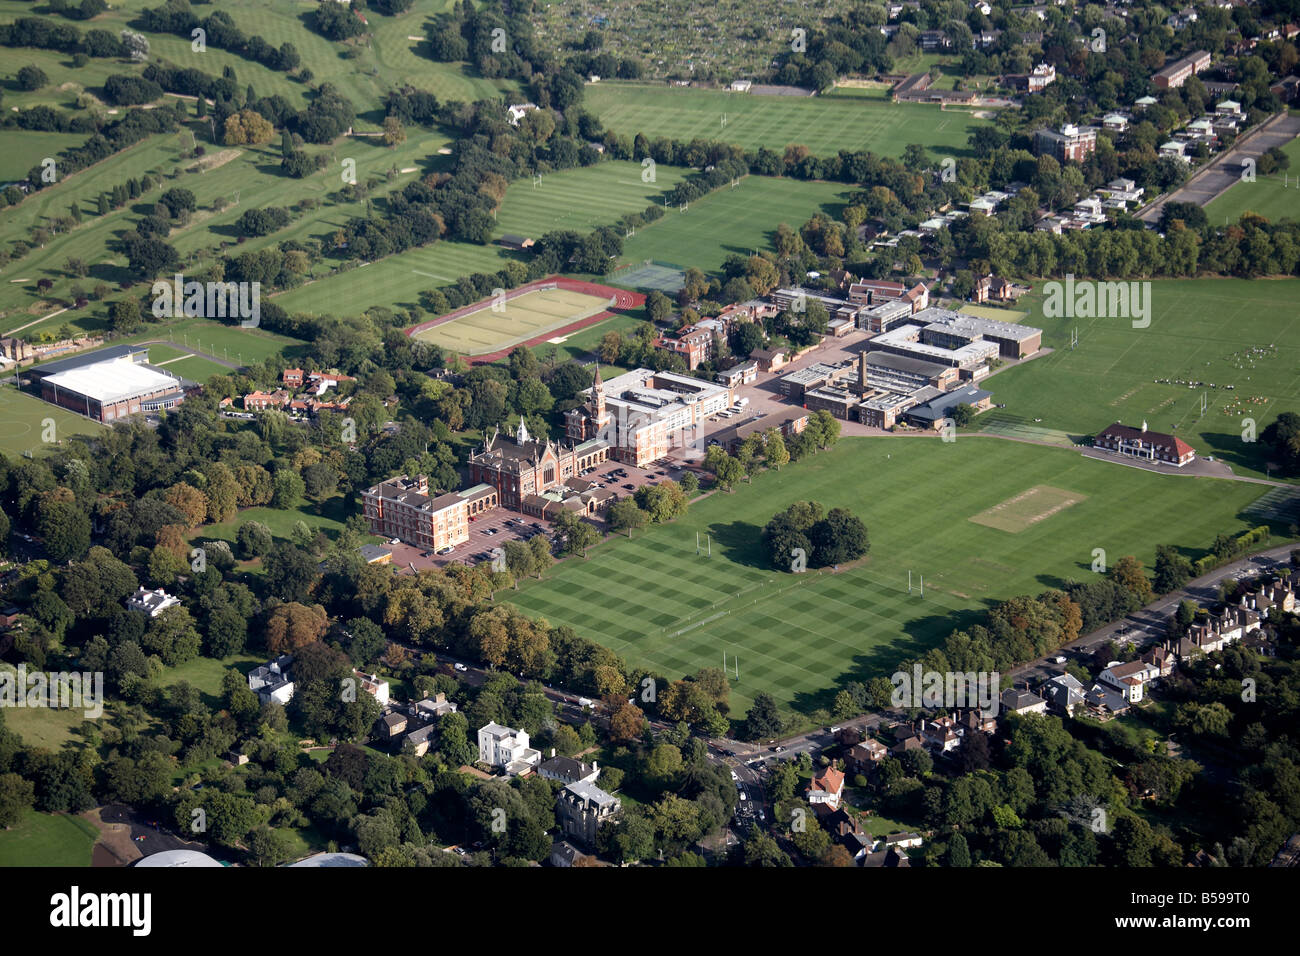 Aerial view south east of Dulwich College playing fields tennis courts Alleyn Park Road Dulwich Common A205 road London SE21 UK Stock Photo